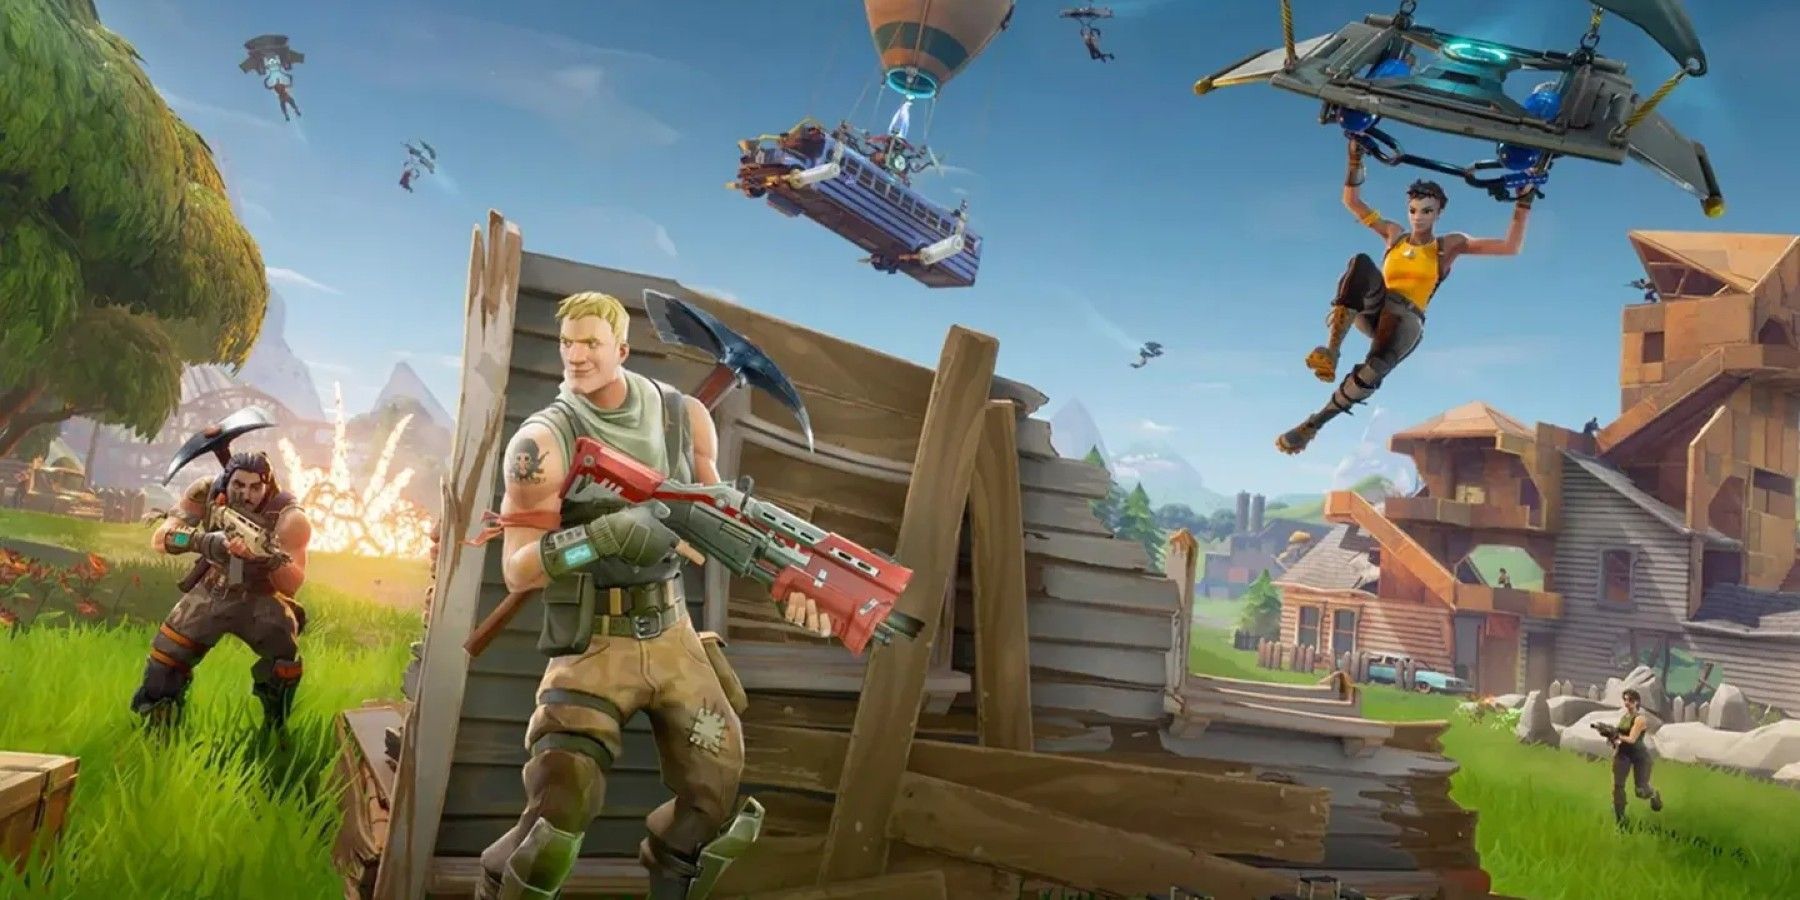 Game Rant - Fortnite players now have a way to add audio